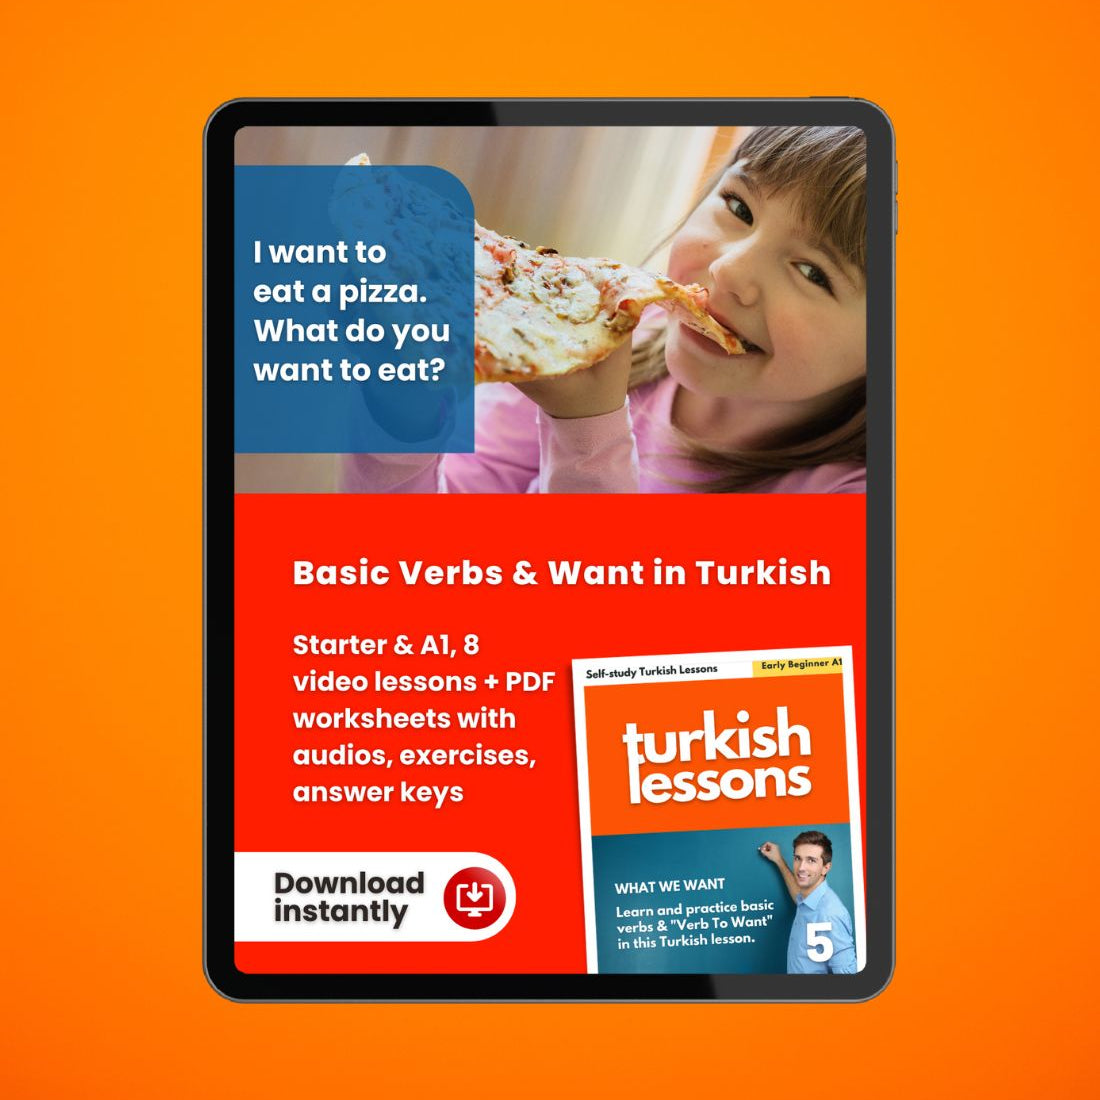 turkish lessons a1 - basic verbs and want in turkish language